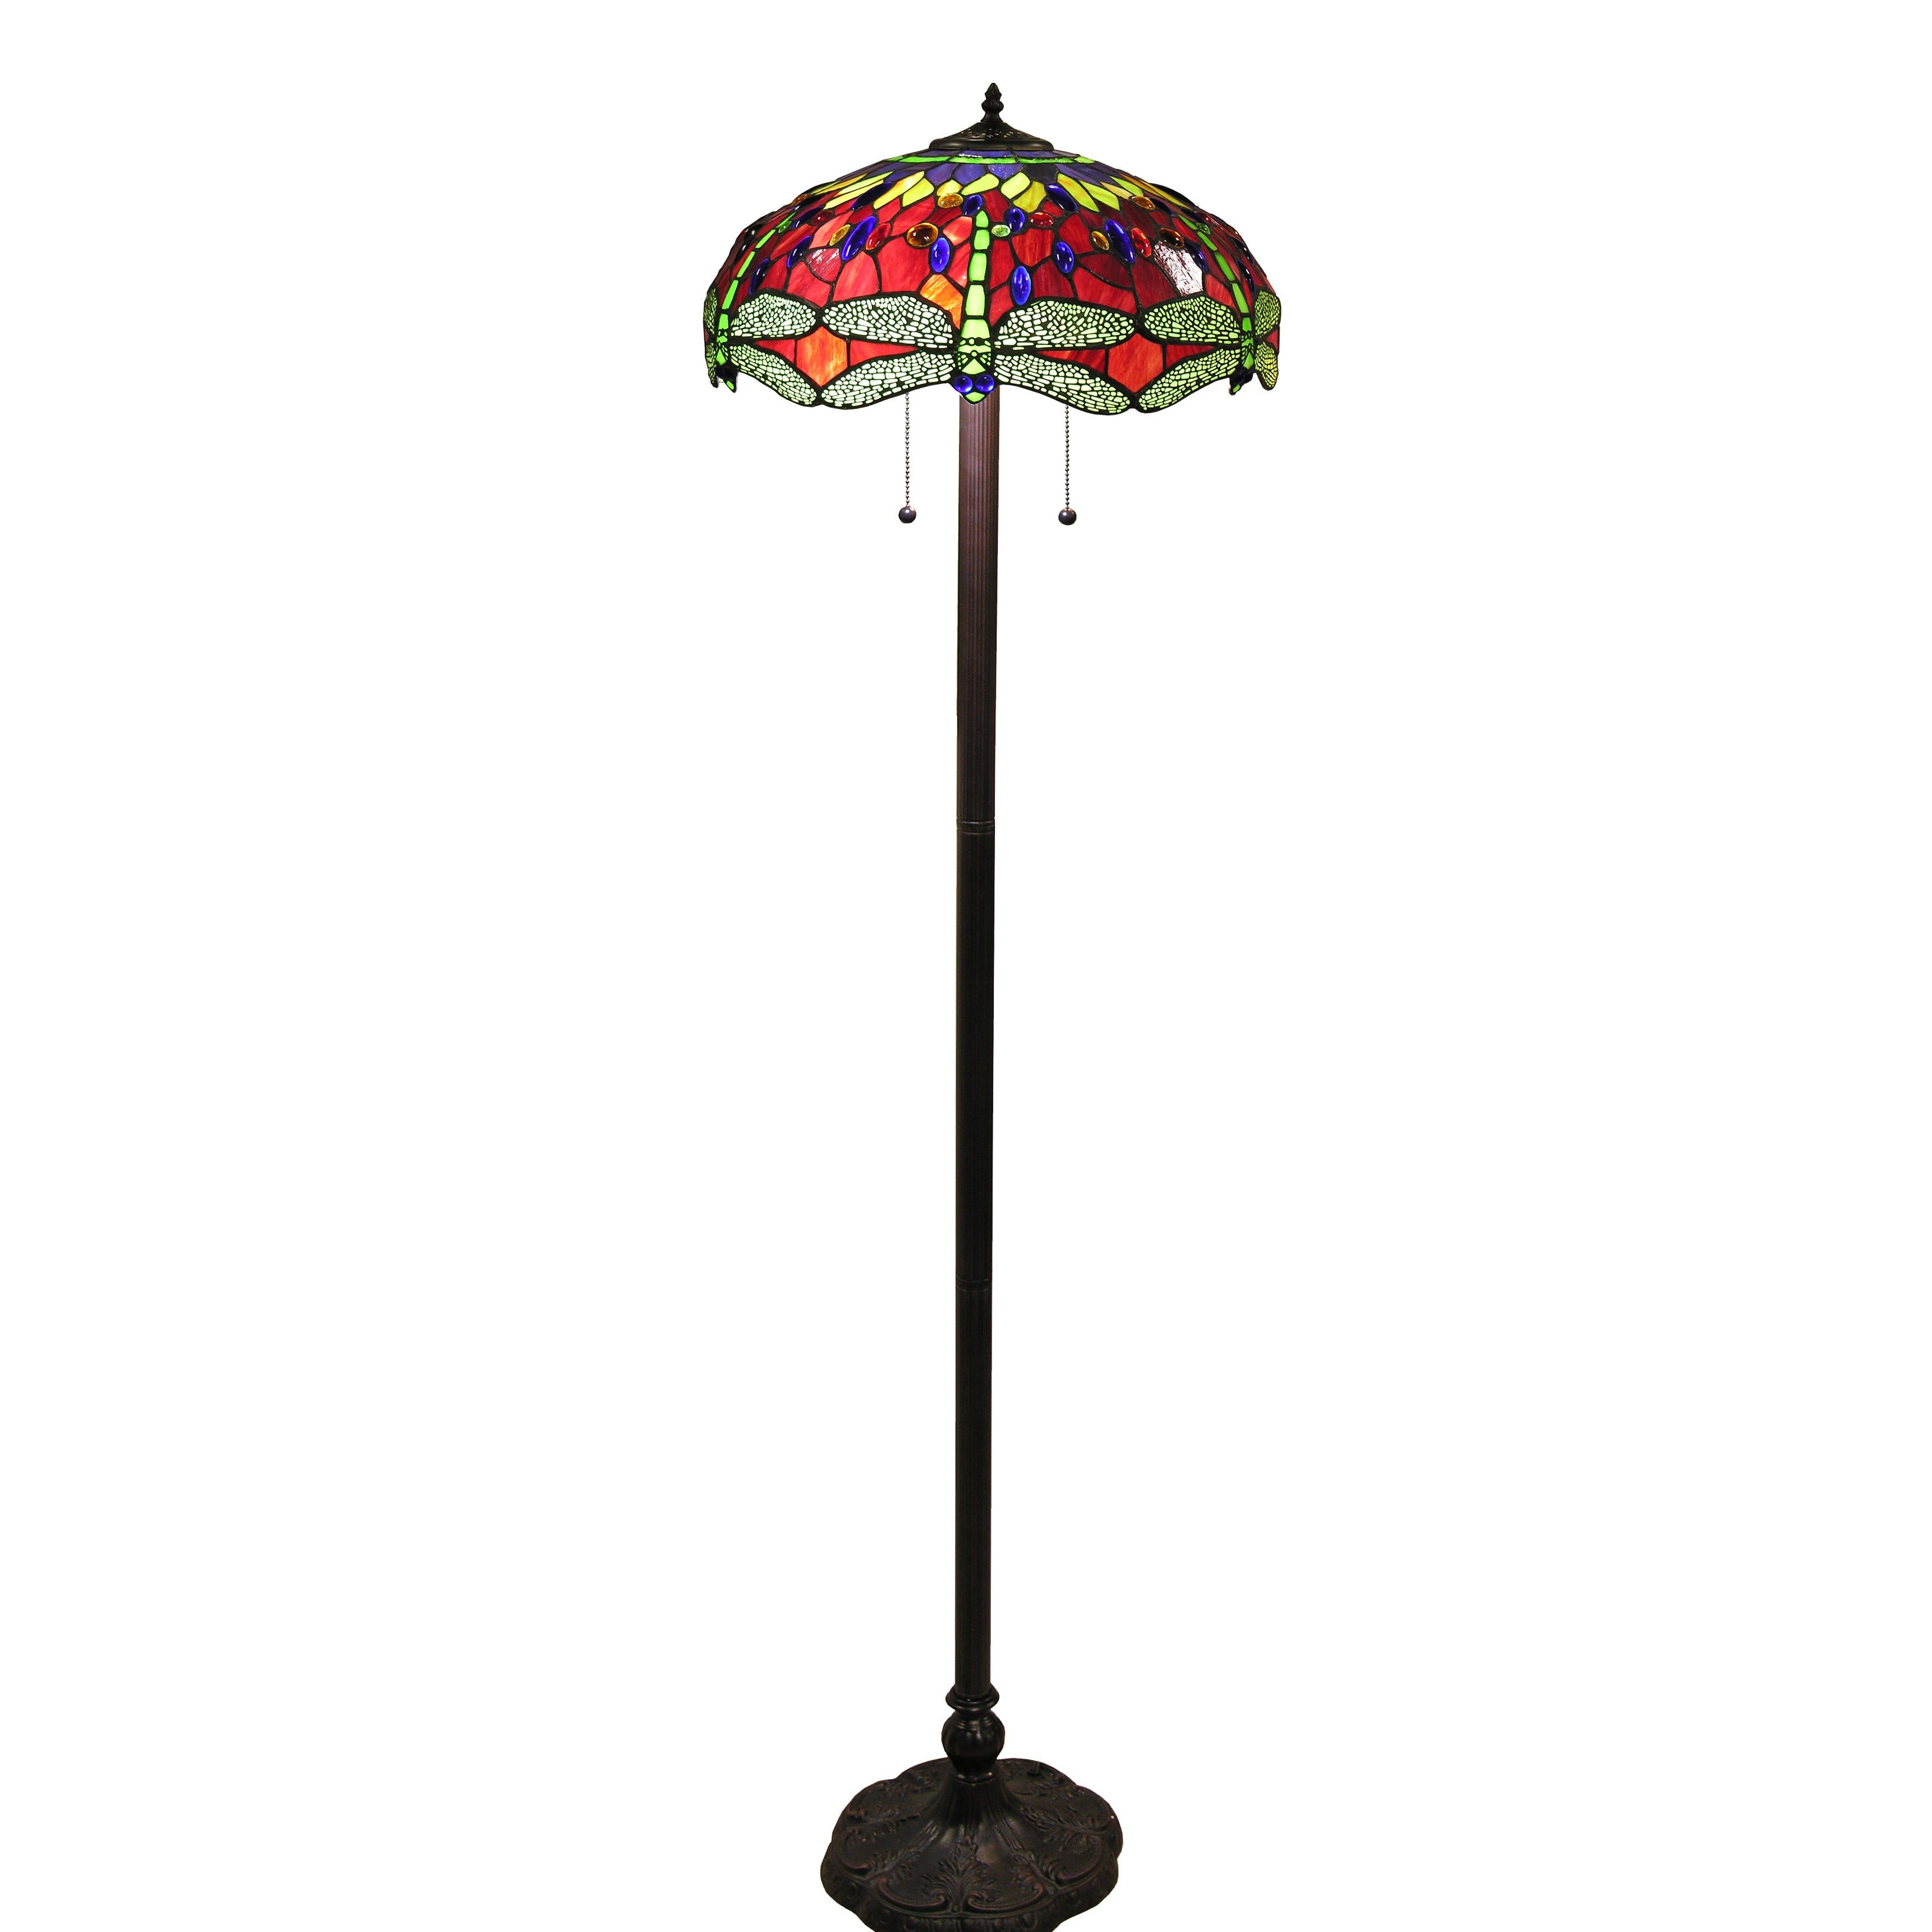 Interior Classy Tiffany Style Floor Lamps With Beautiful throughout dimensions 3264 X 3264